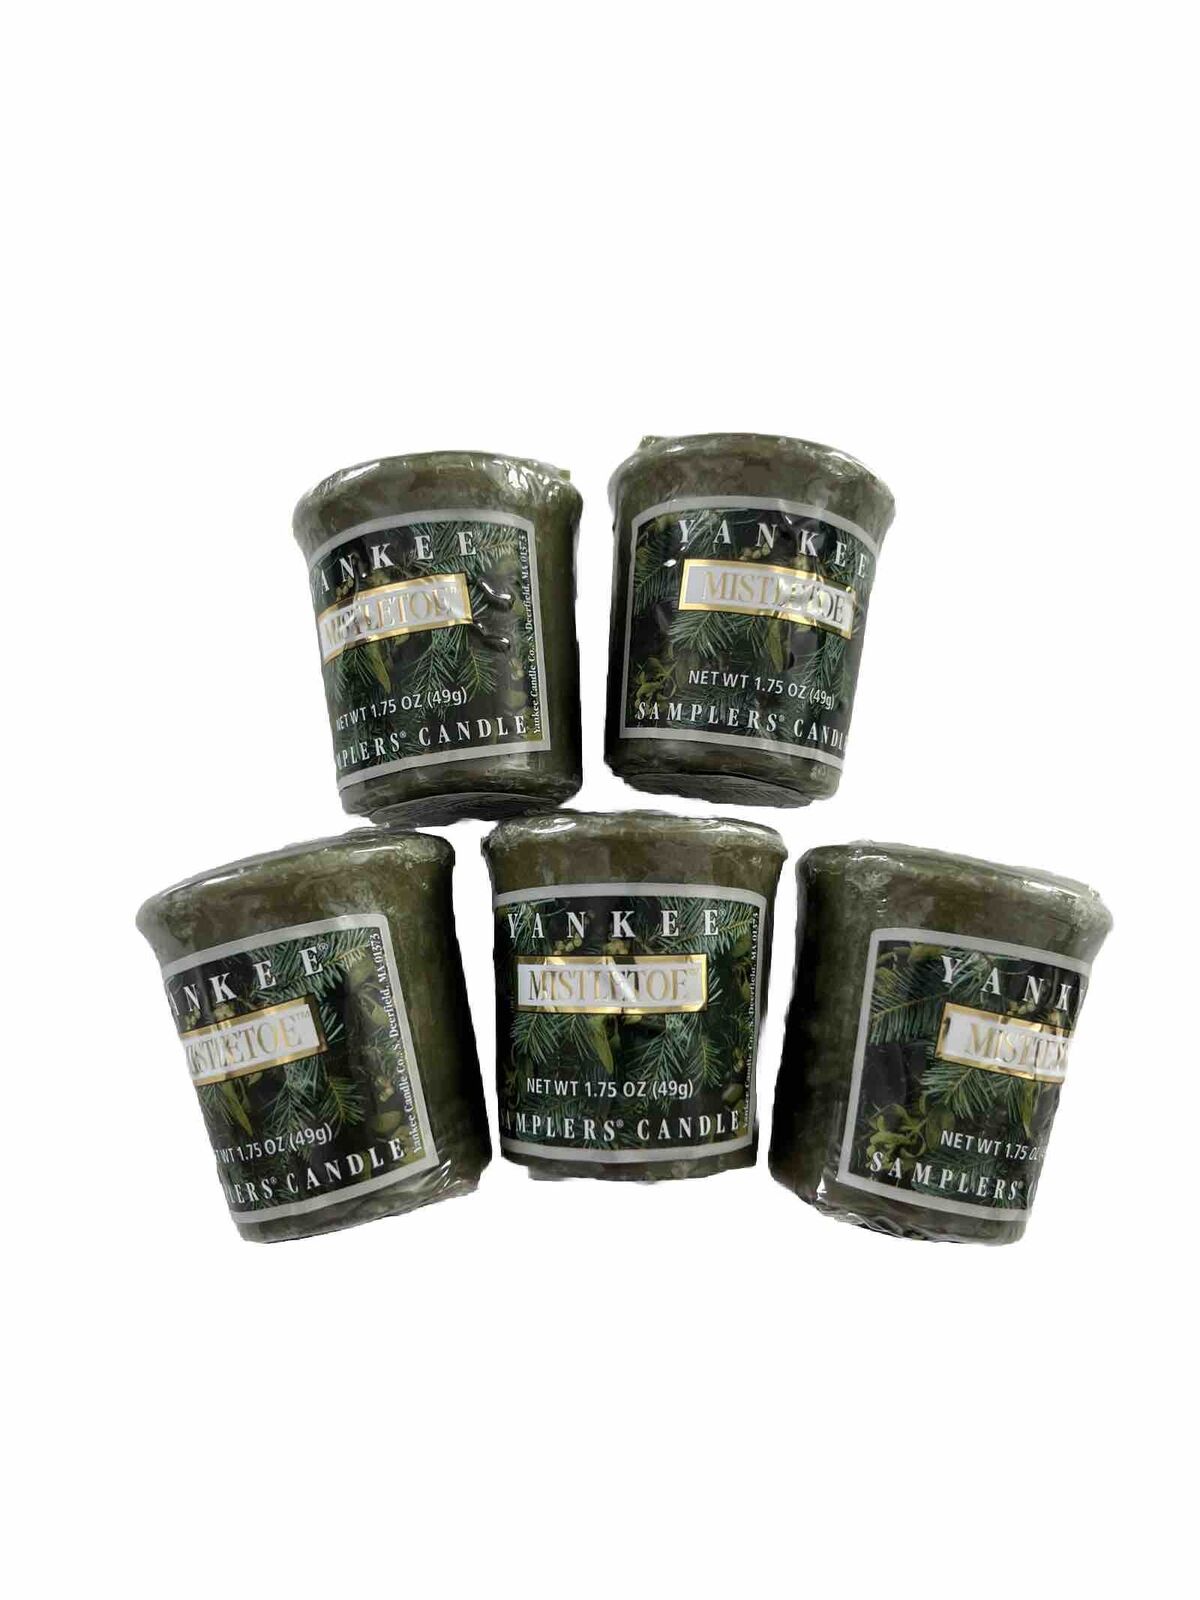 Yankee Candle Mistletoe Scented Lot of 5 Sealed Votive Candles Christmas